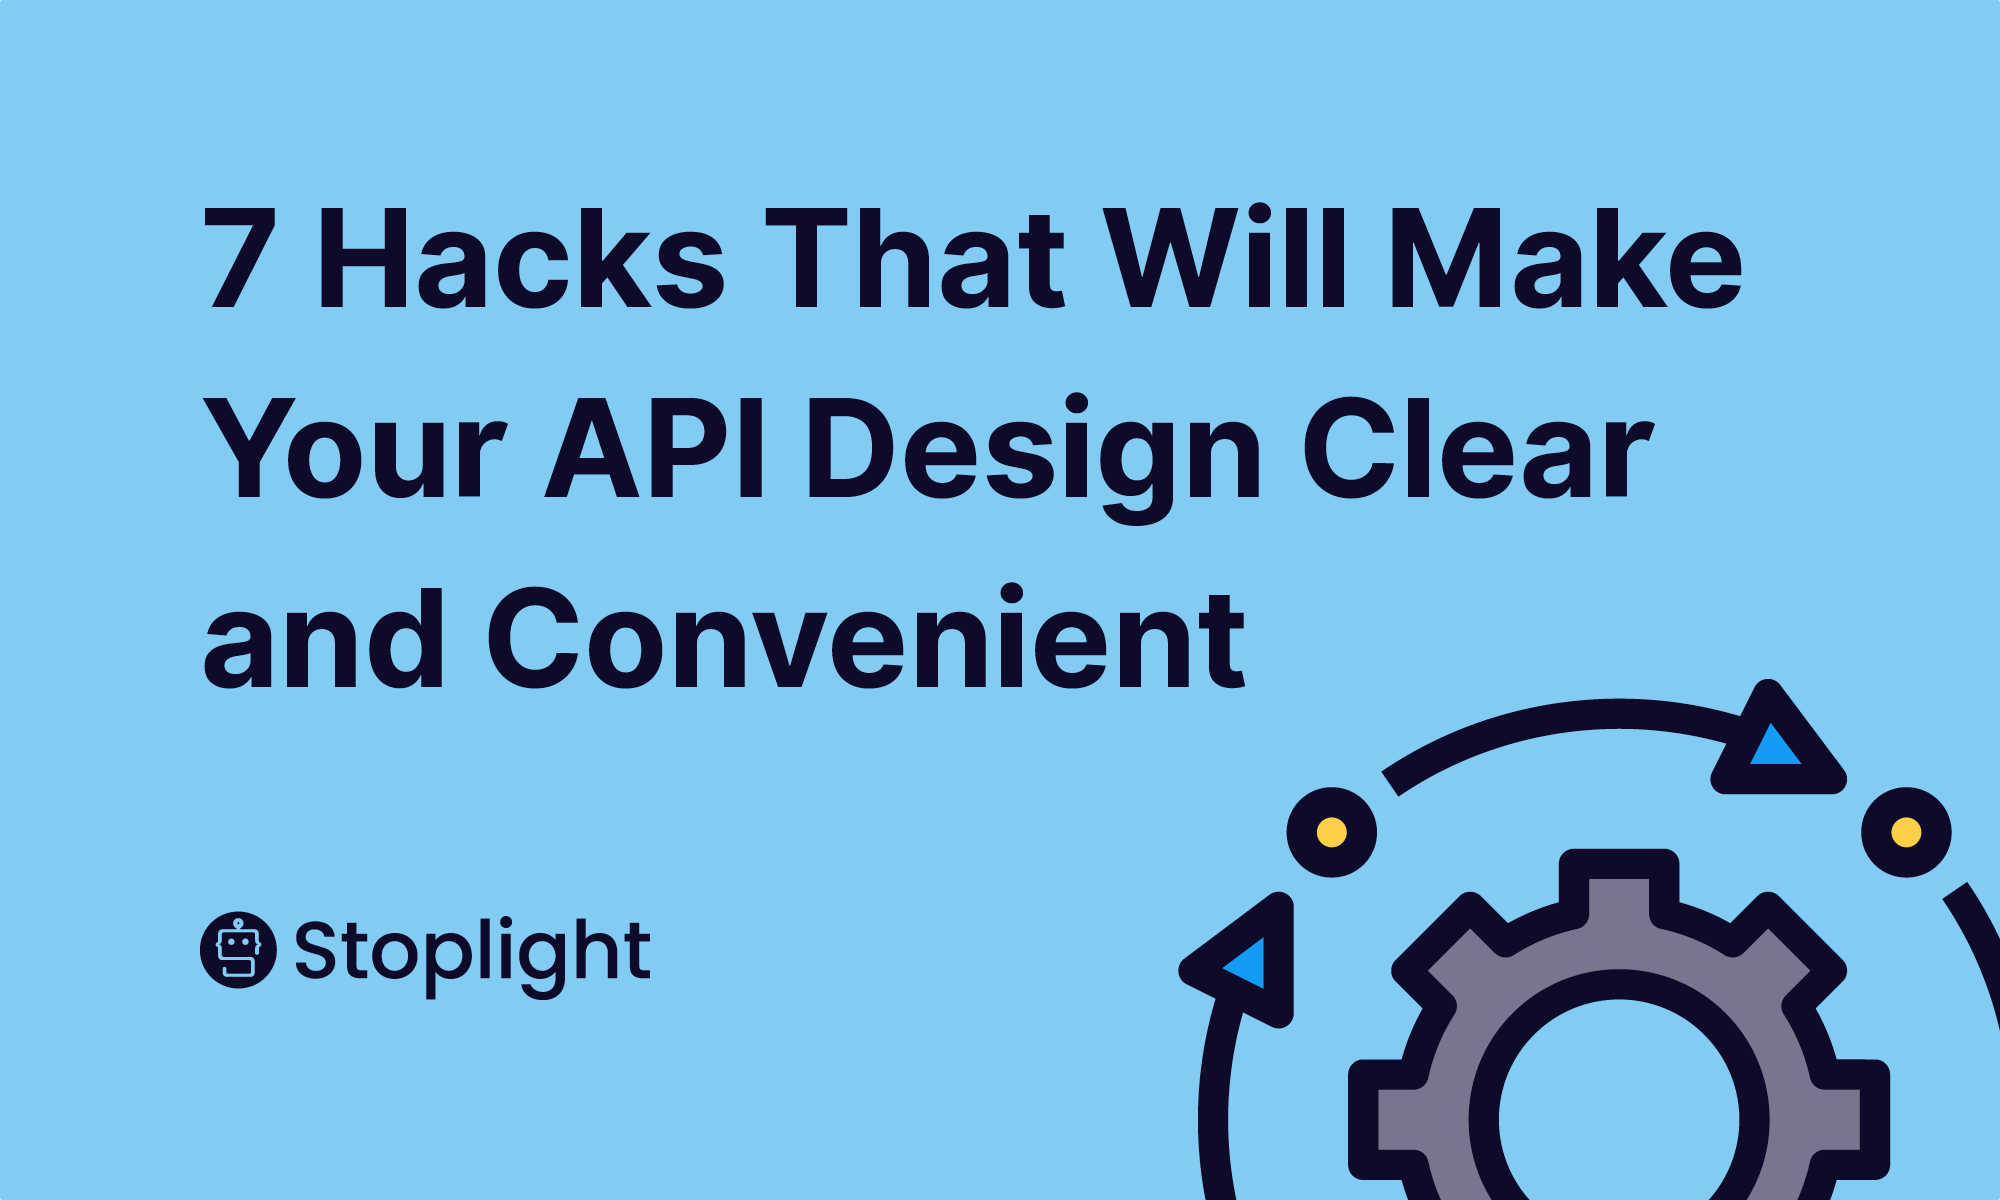 7 Hacks That Will Make Your API Design Clear and Convenient